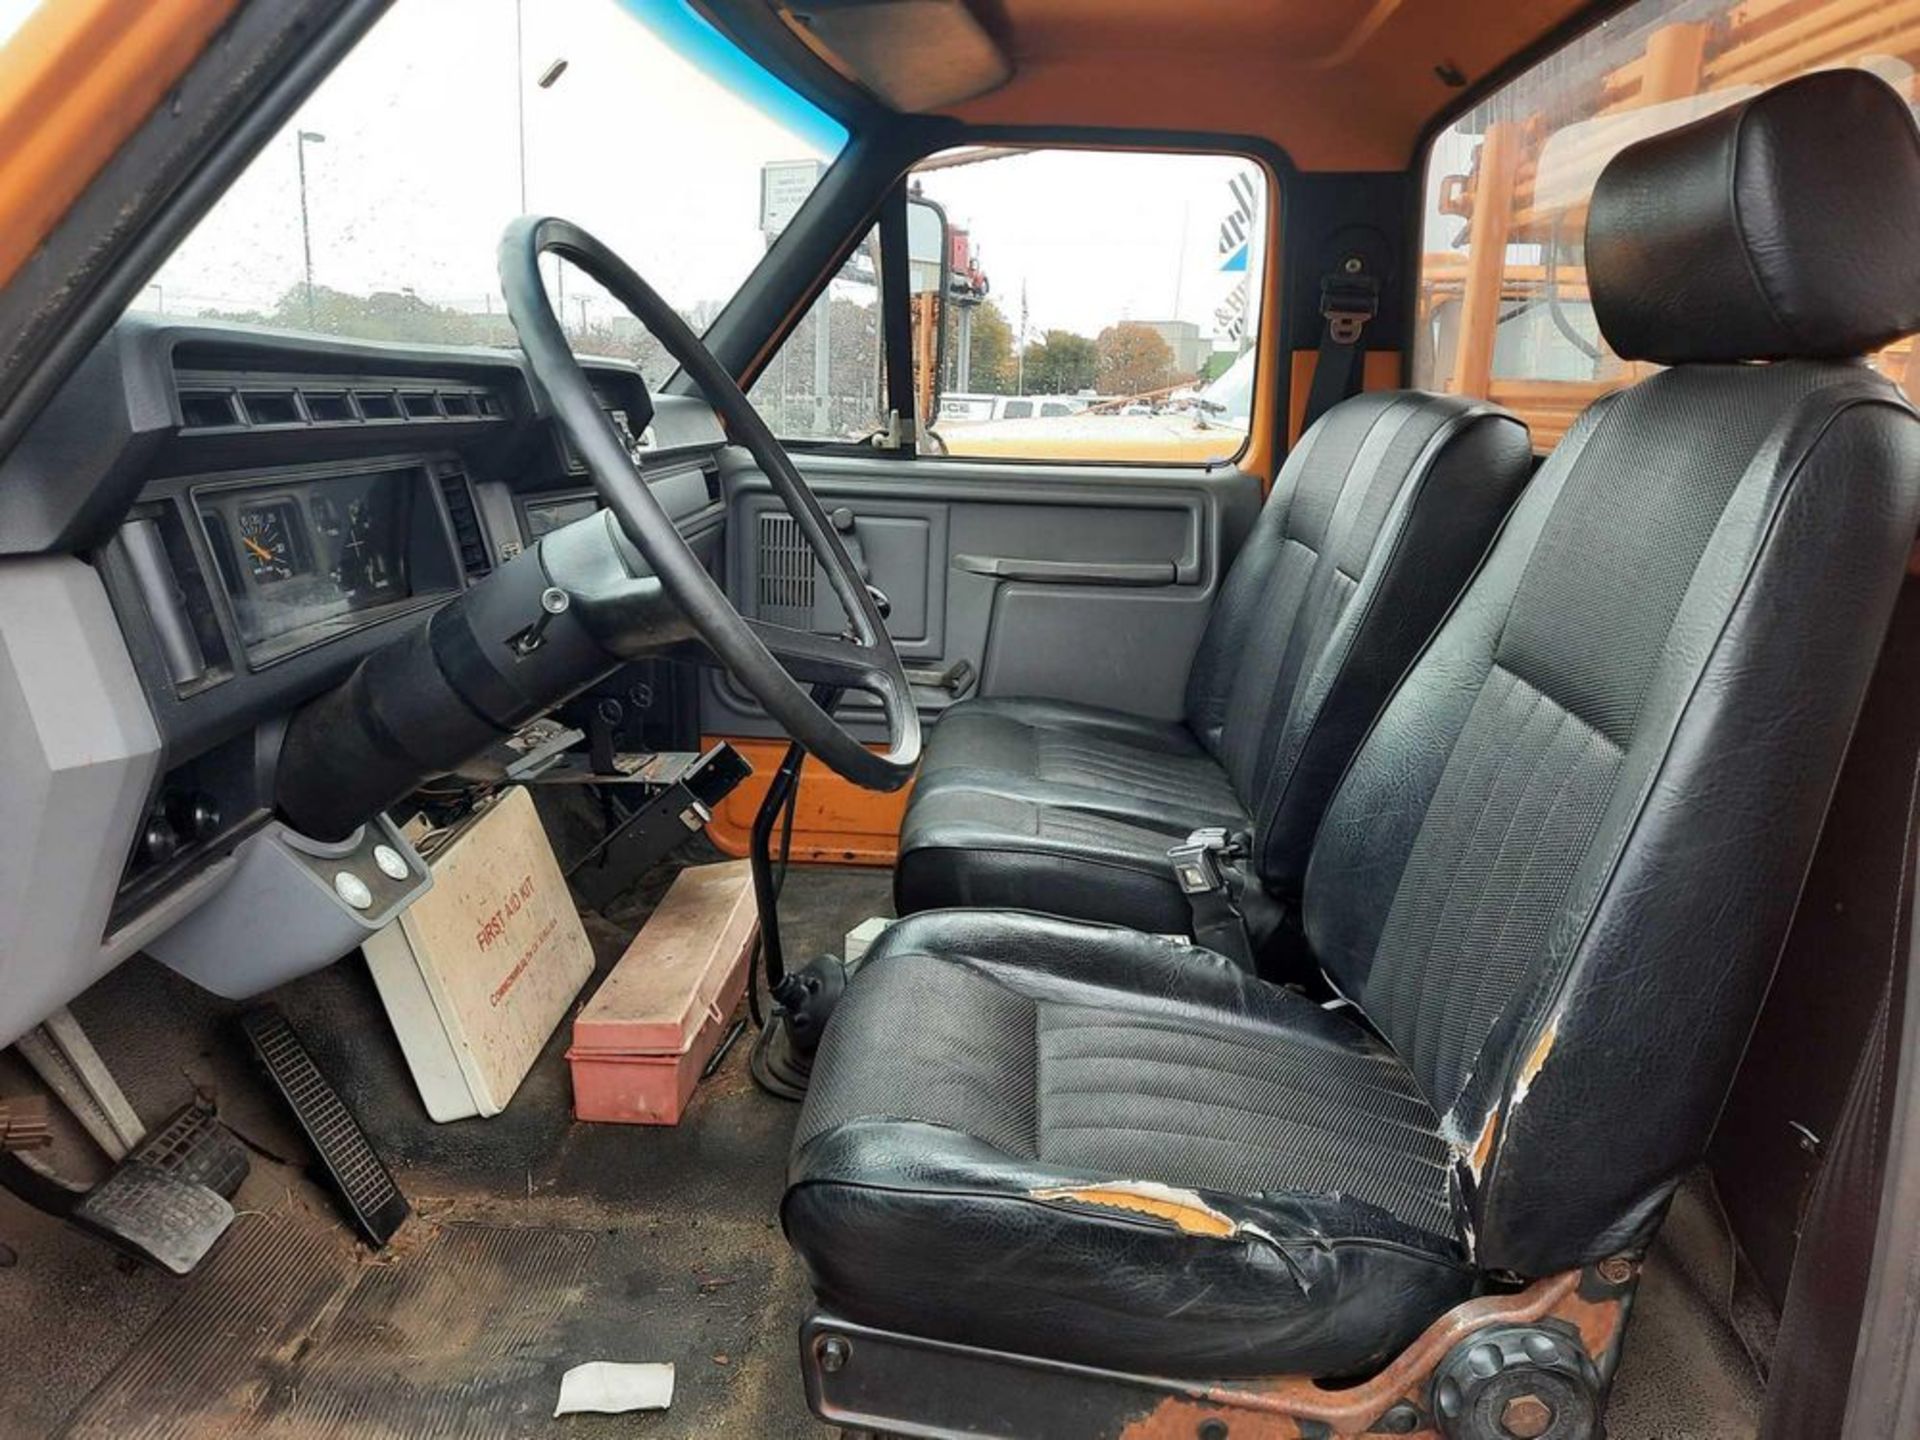 1995 FORD F800 STAKE BODY TRUCK W/ARROW BOARD (VDOT UNIT: R01244) - Image 10 of 23